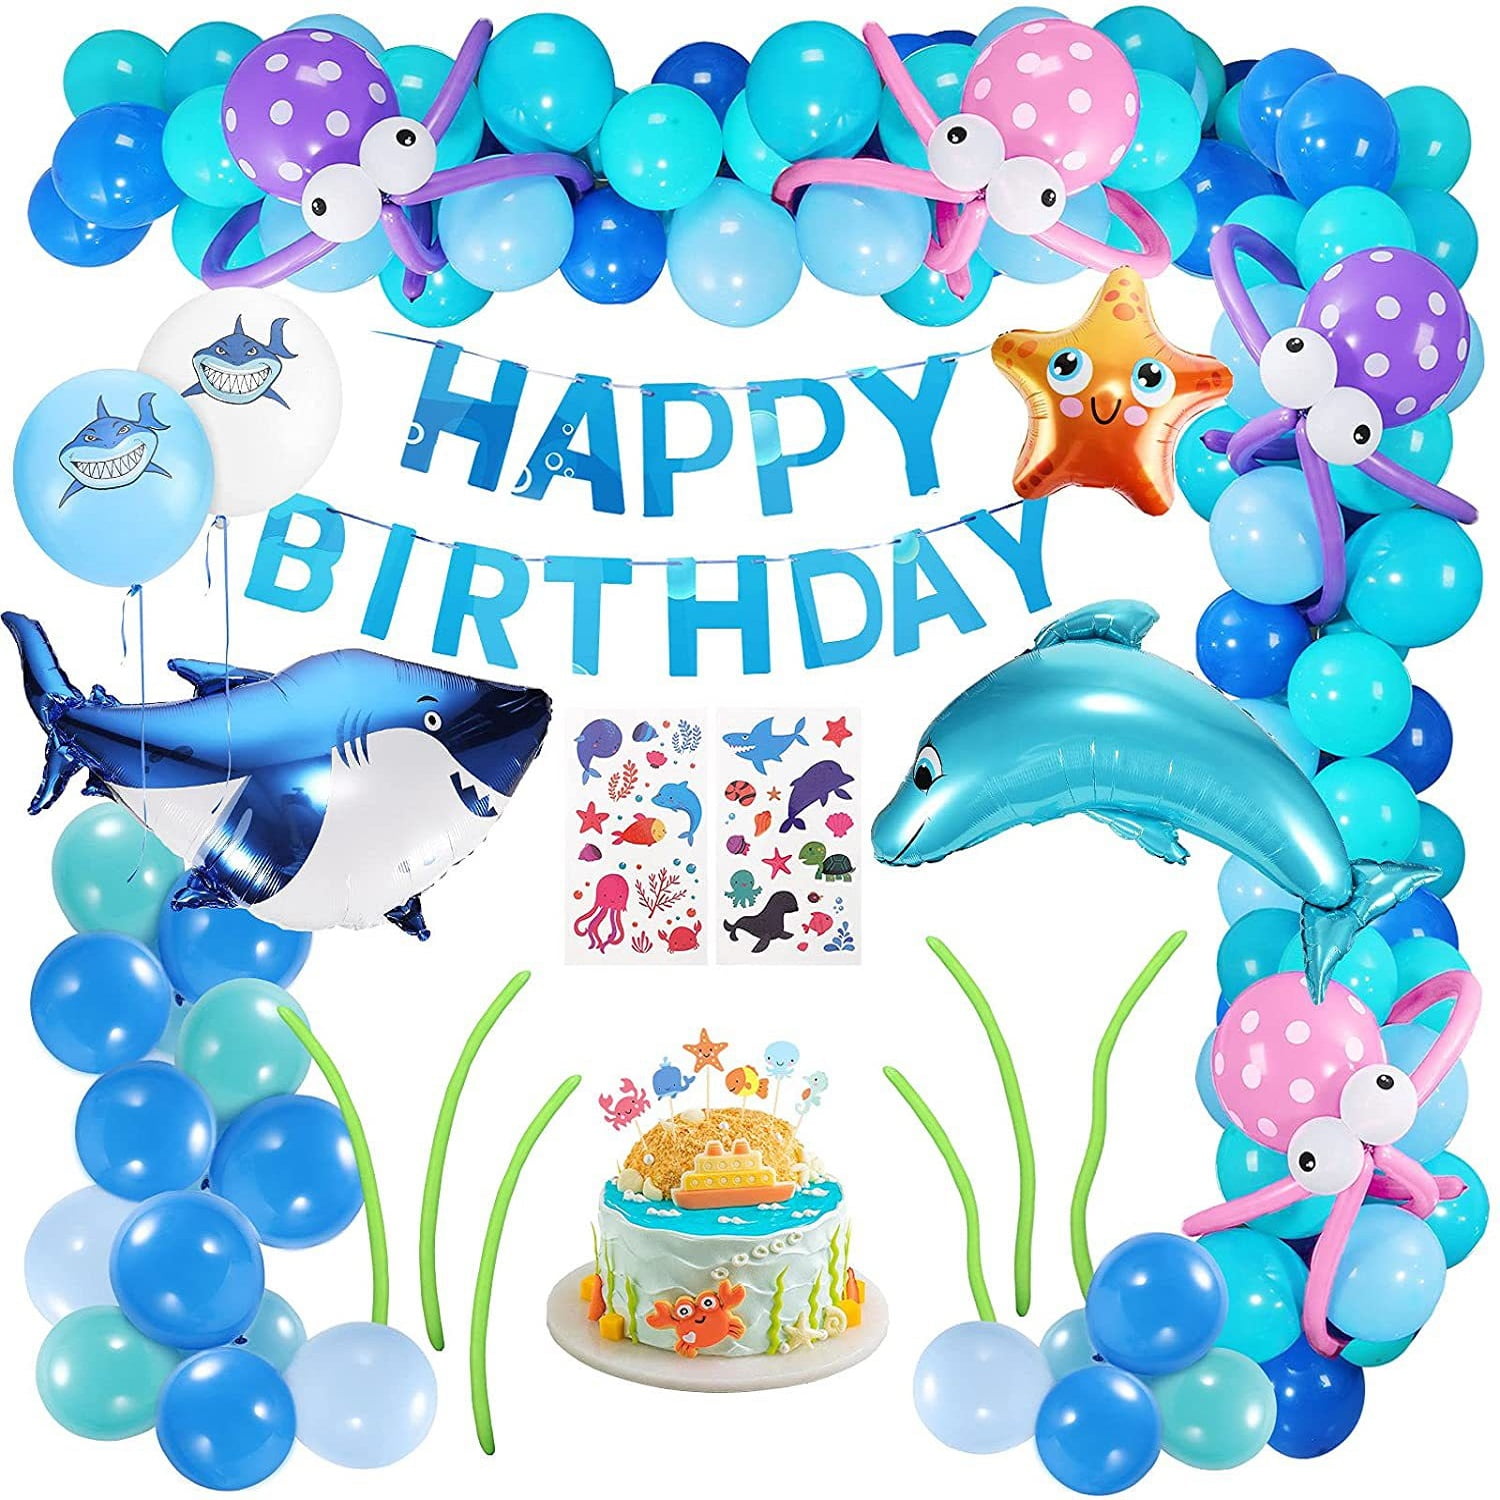 NBPOWER 100 Pcs Under the Sea Party Decorations, Baby Shark Birthday  Decorations for Beach and Pool Party, Ocean Animals Theme Birthday Party  Decorations Include Baby Shark Balloons Party Supplies 